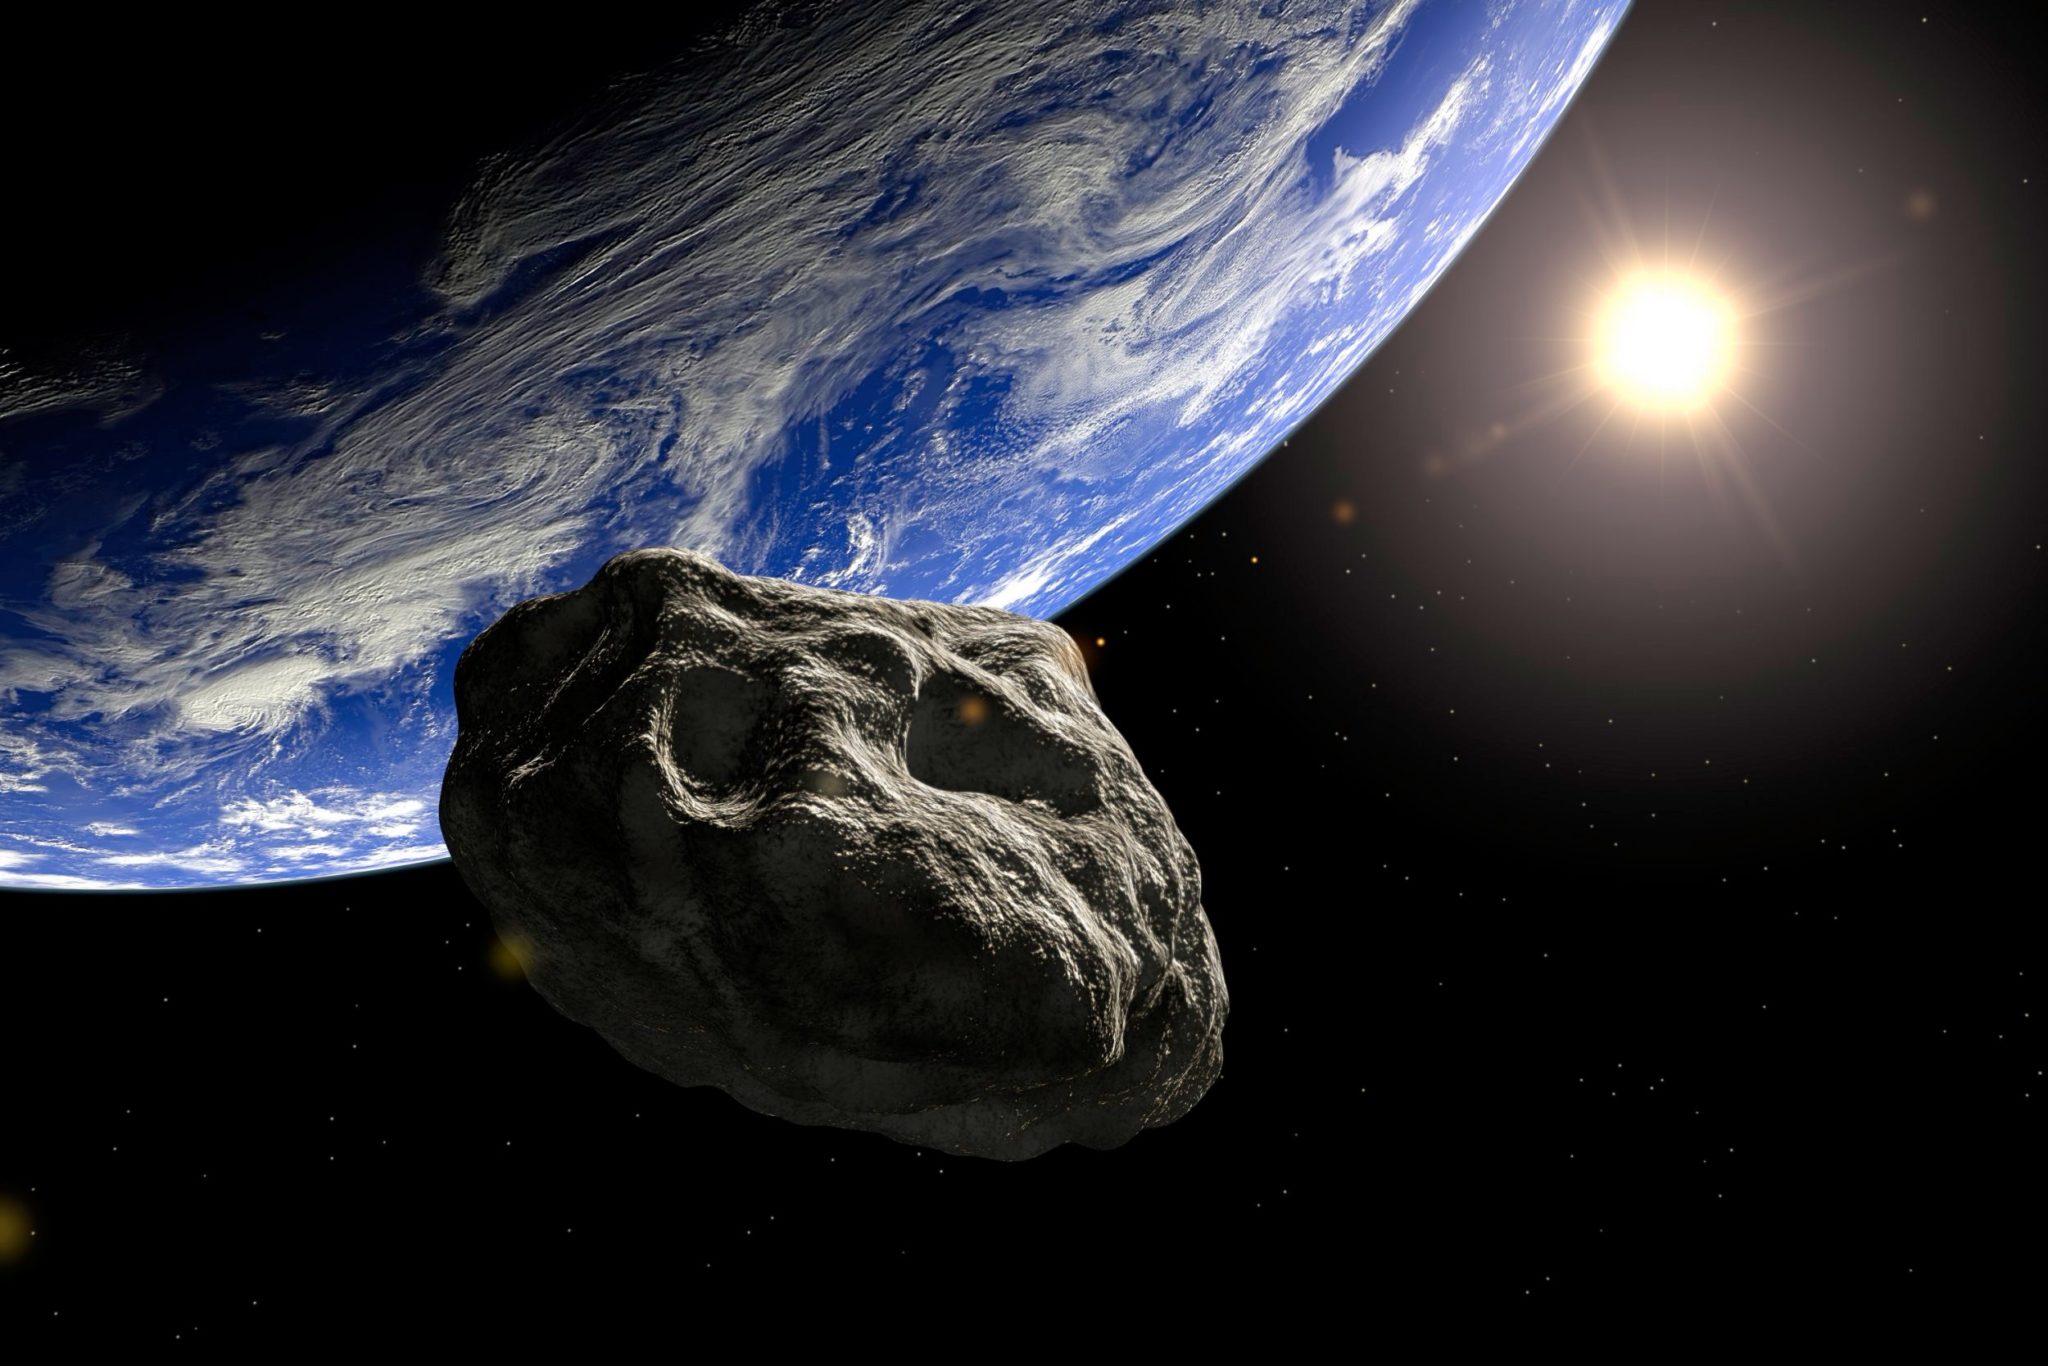 NASA Warns That Another Massive Asteroid Will Whiz By Earth This Week